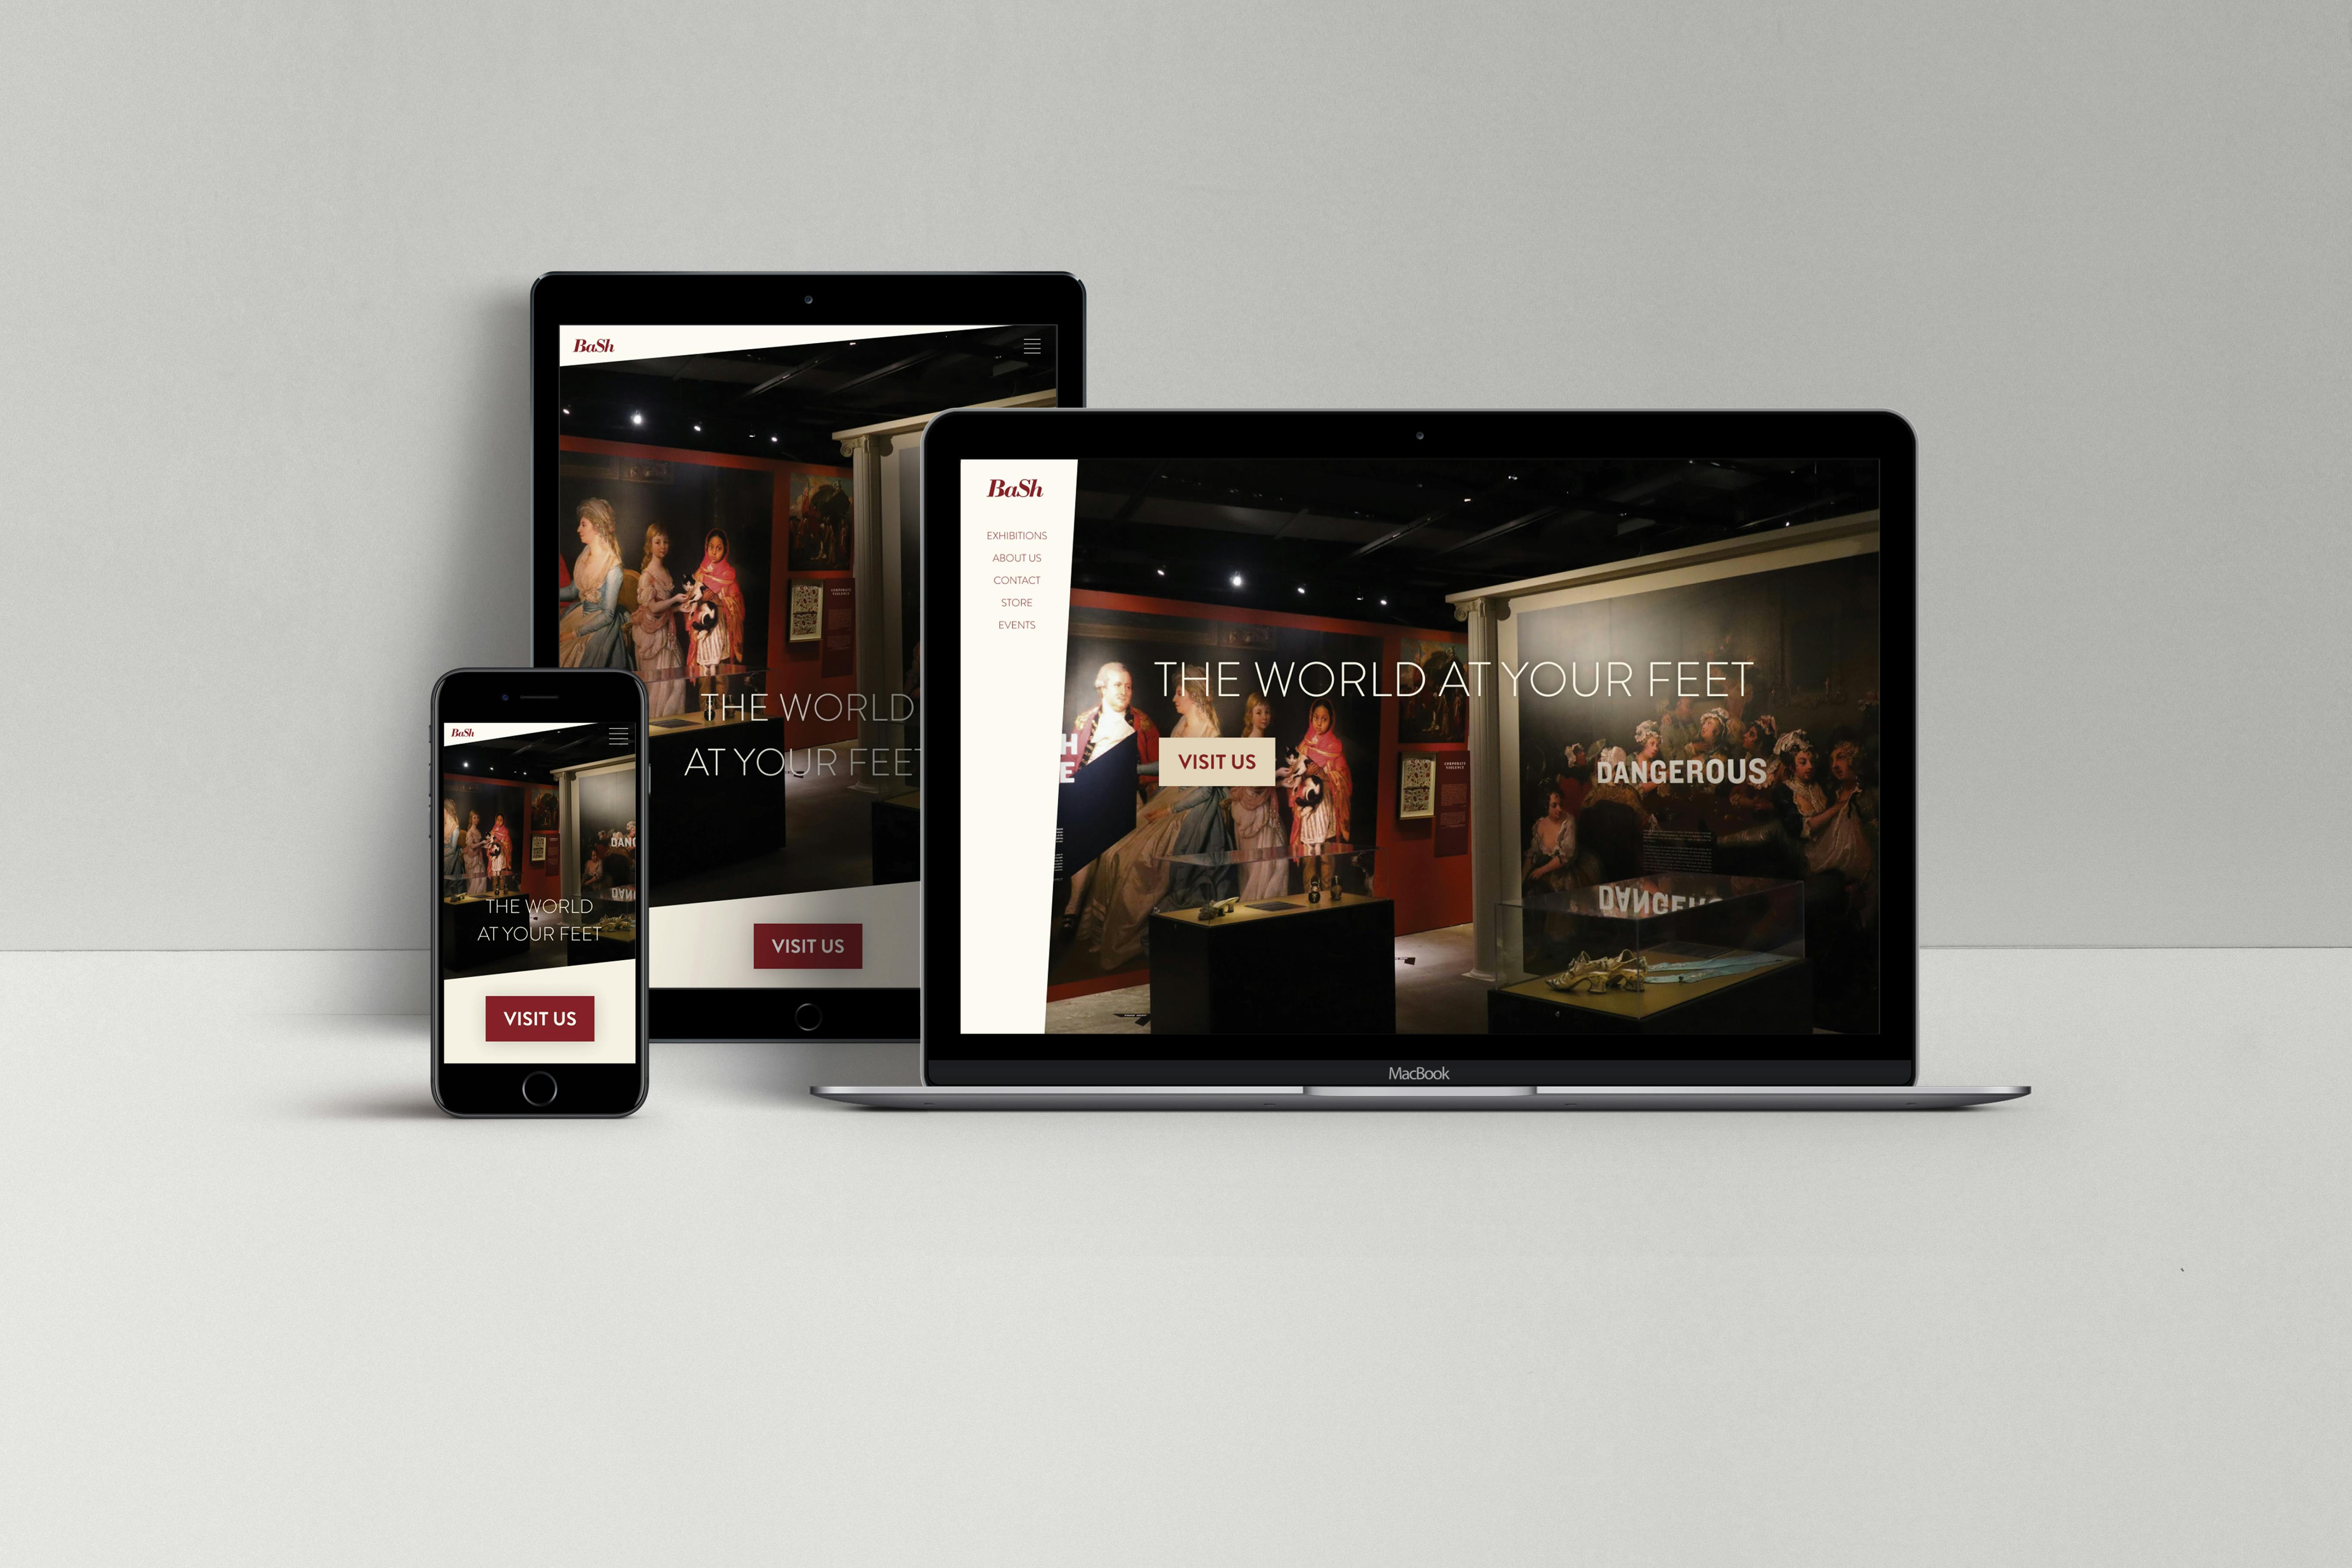 BaSh museum homepage responsive design on laptop, tablet, and mobile phone screens